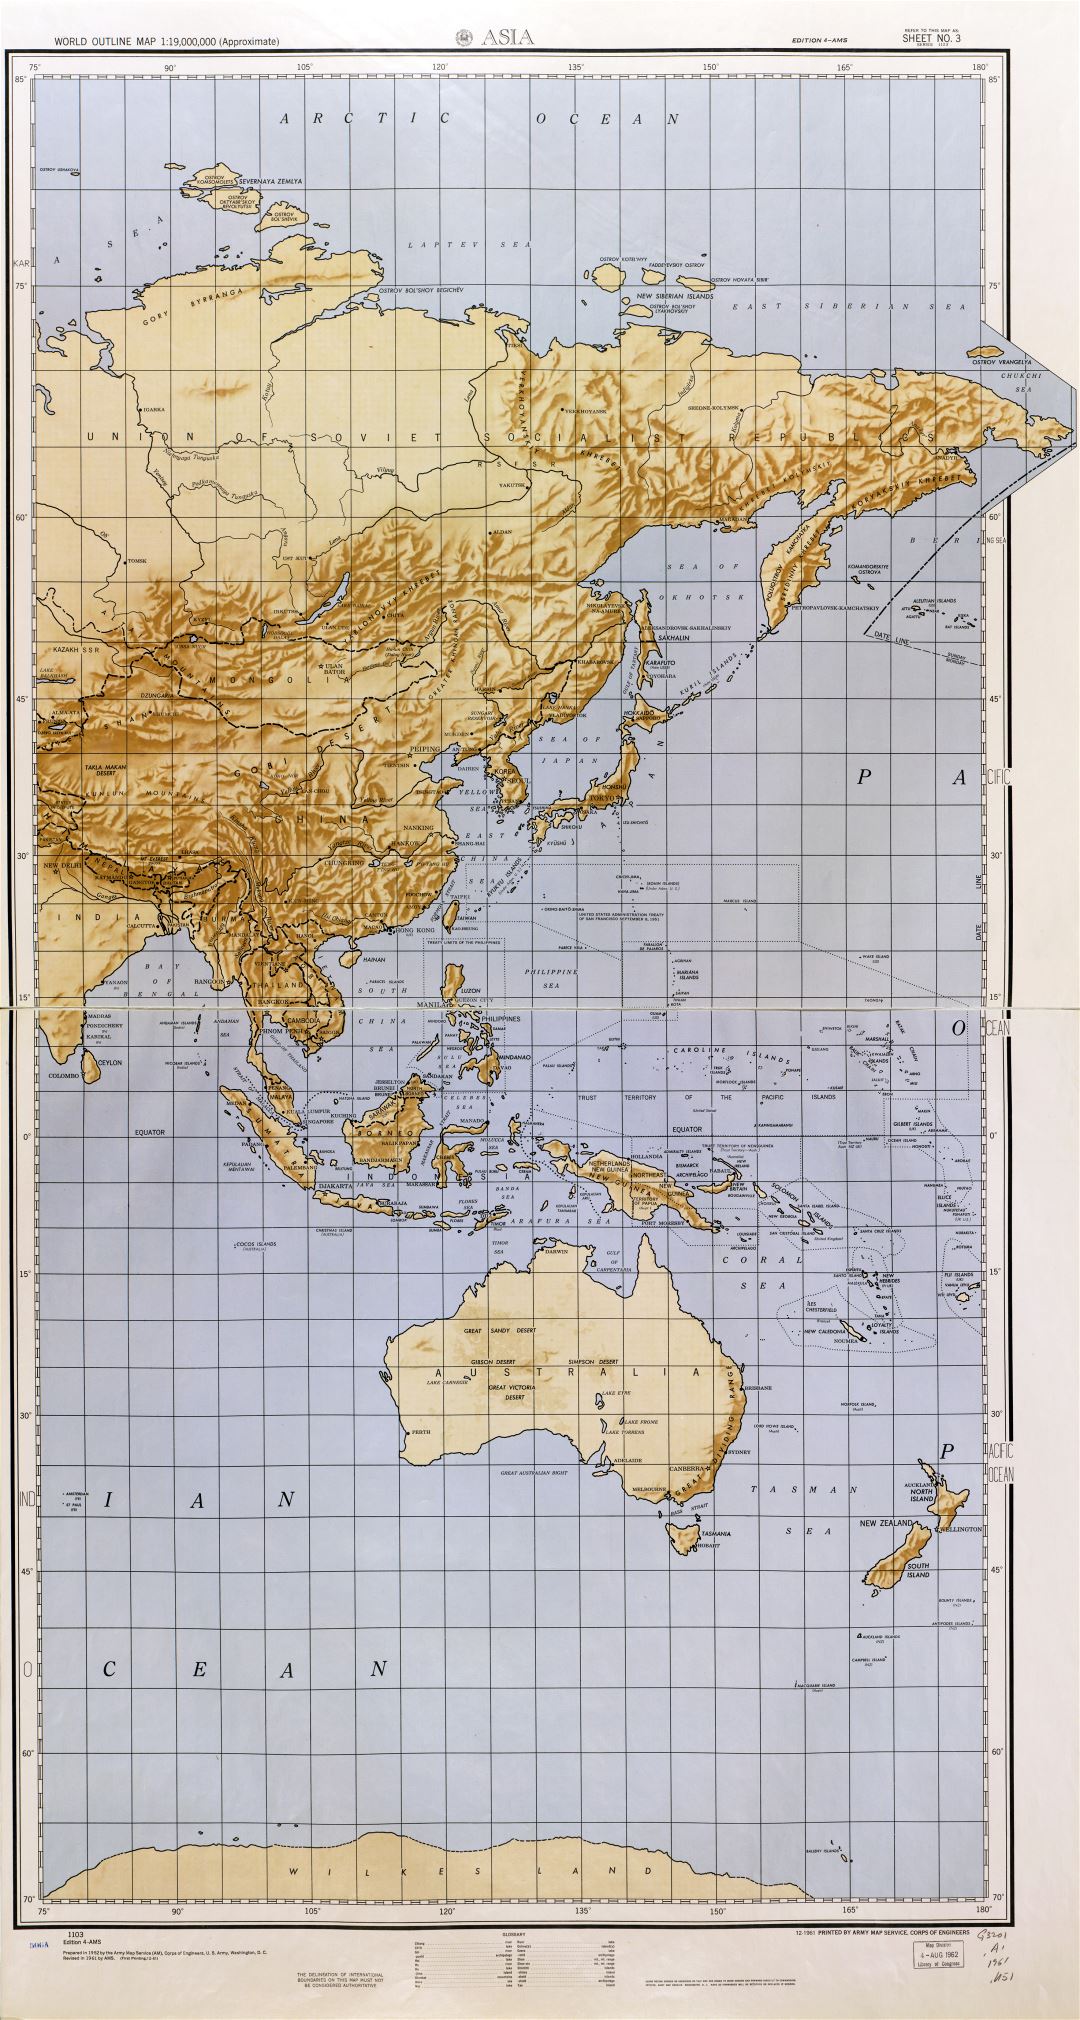 Large detailed World outline map with relief - part 3 (Asia) 1961-62